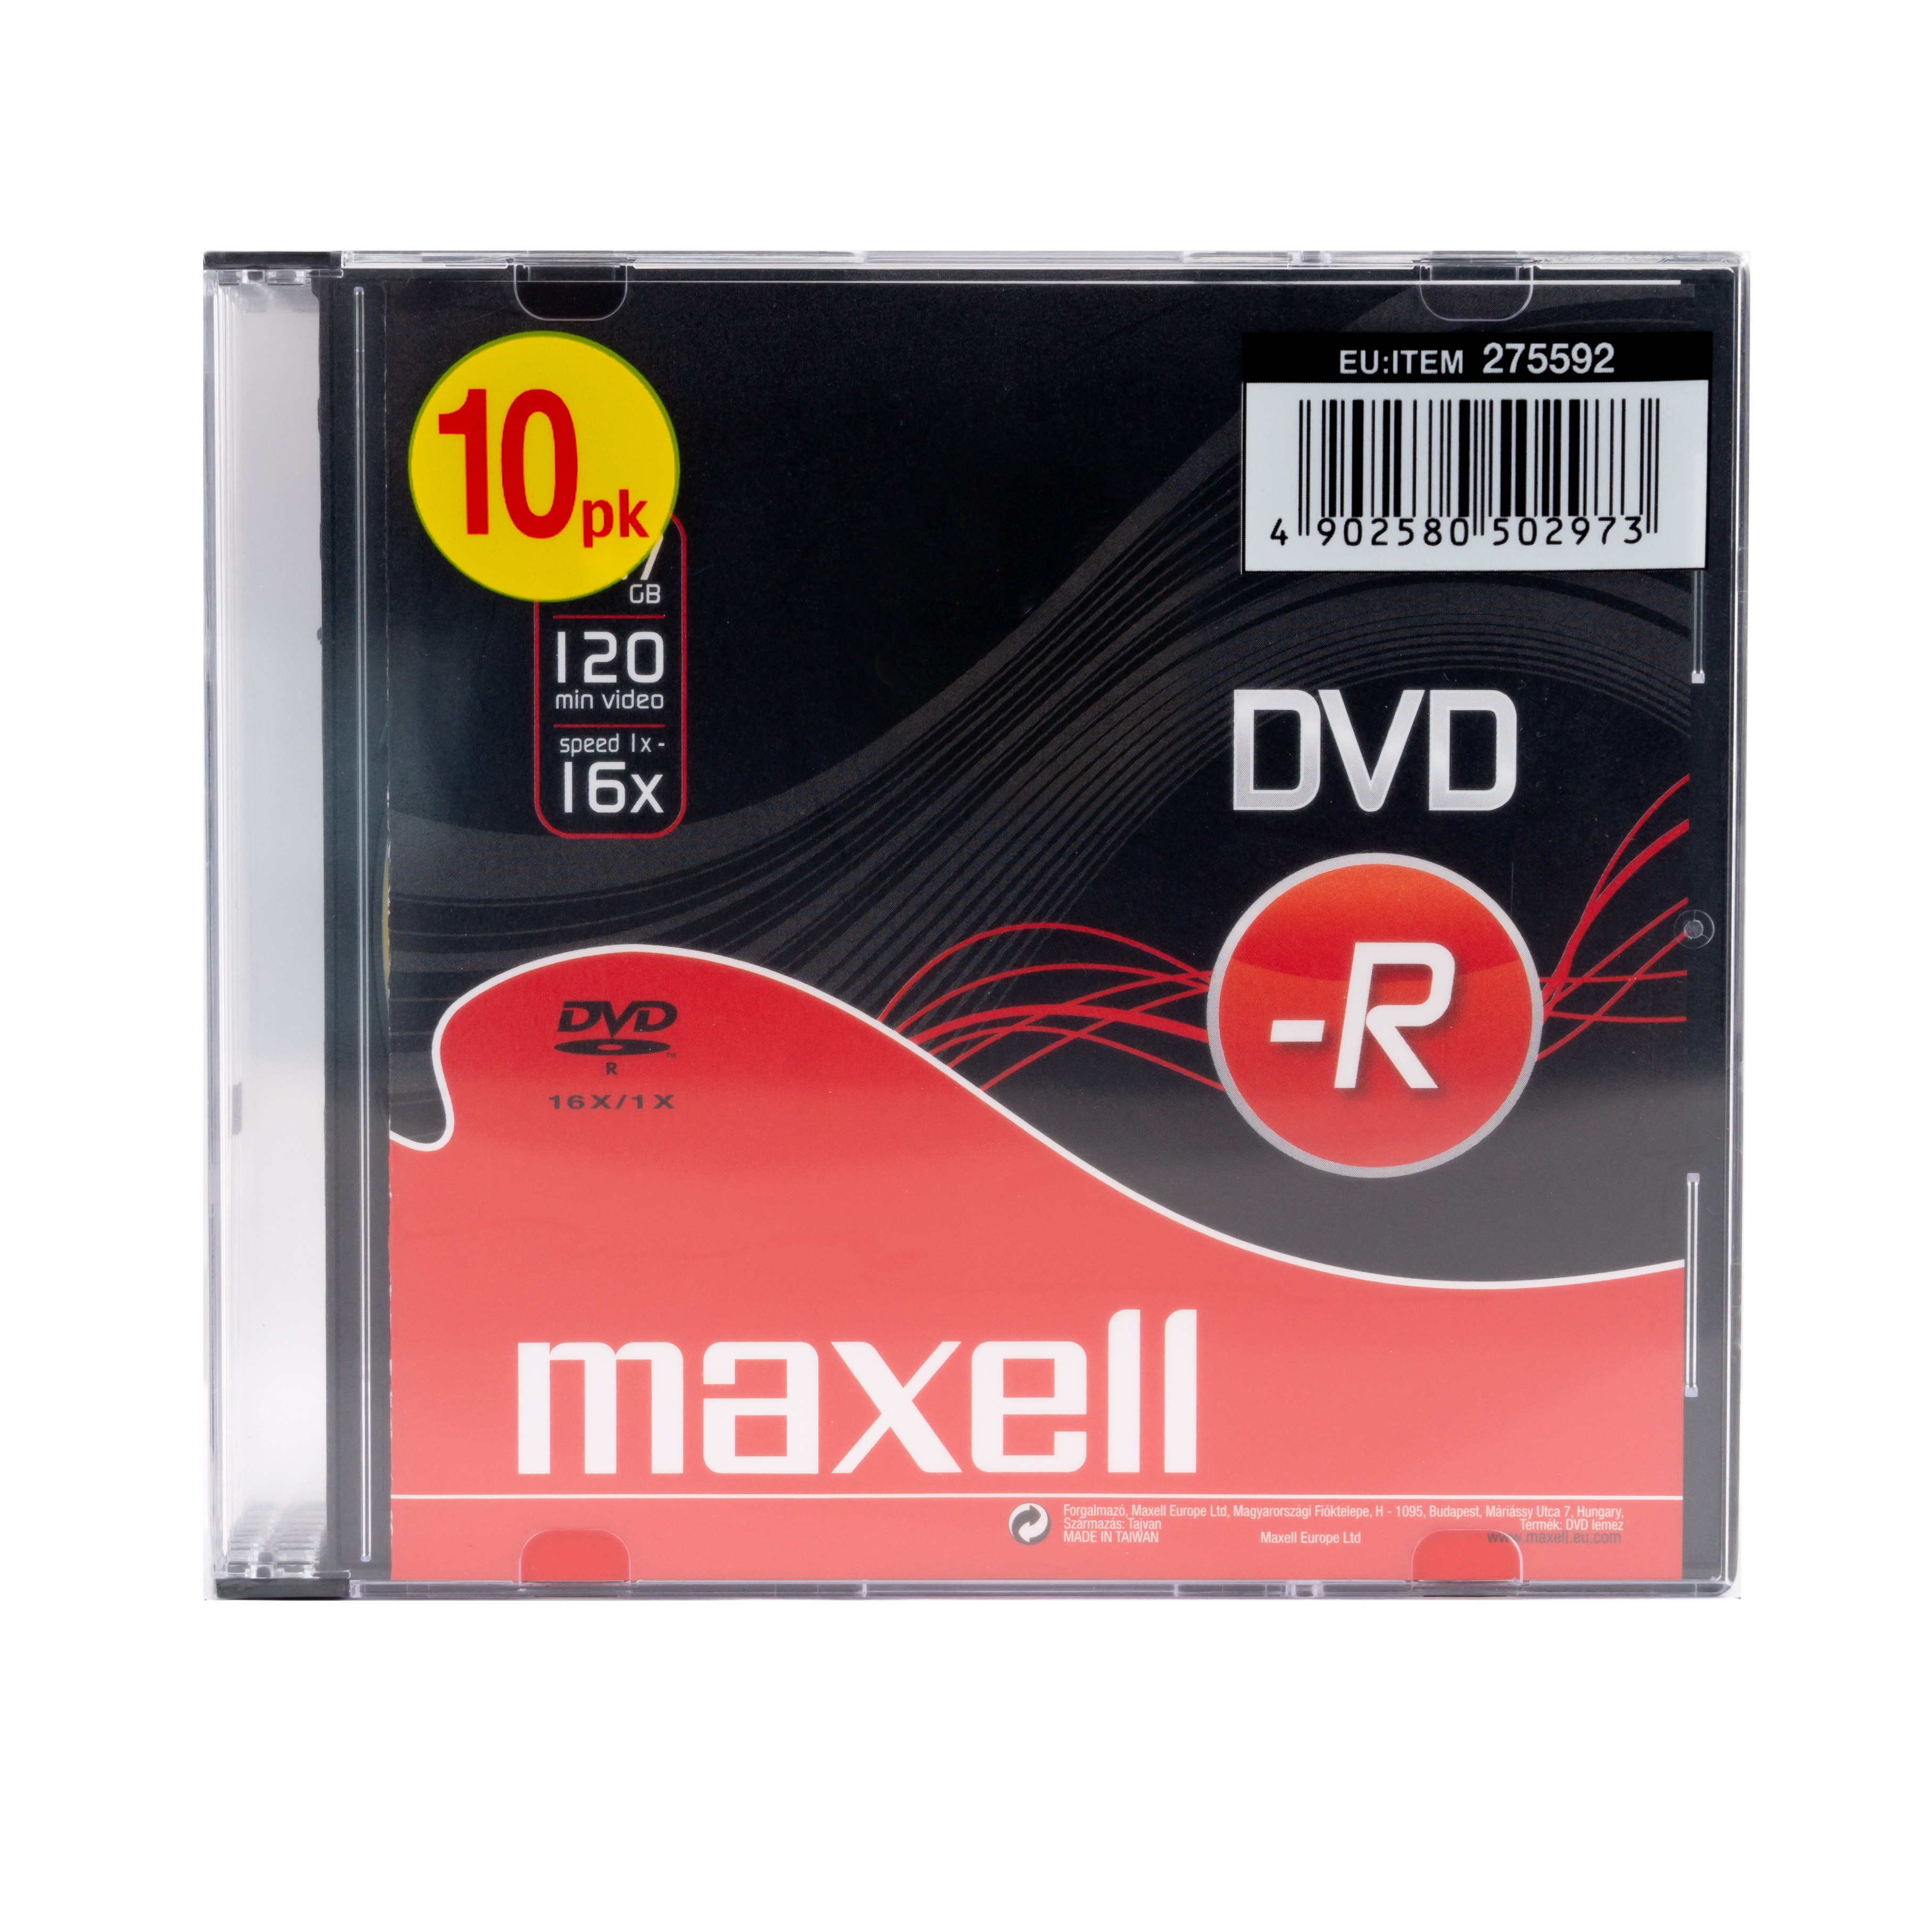 Dvd R 47 10 Pack 5mm Jewel Case Maxell